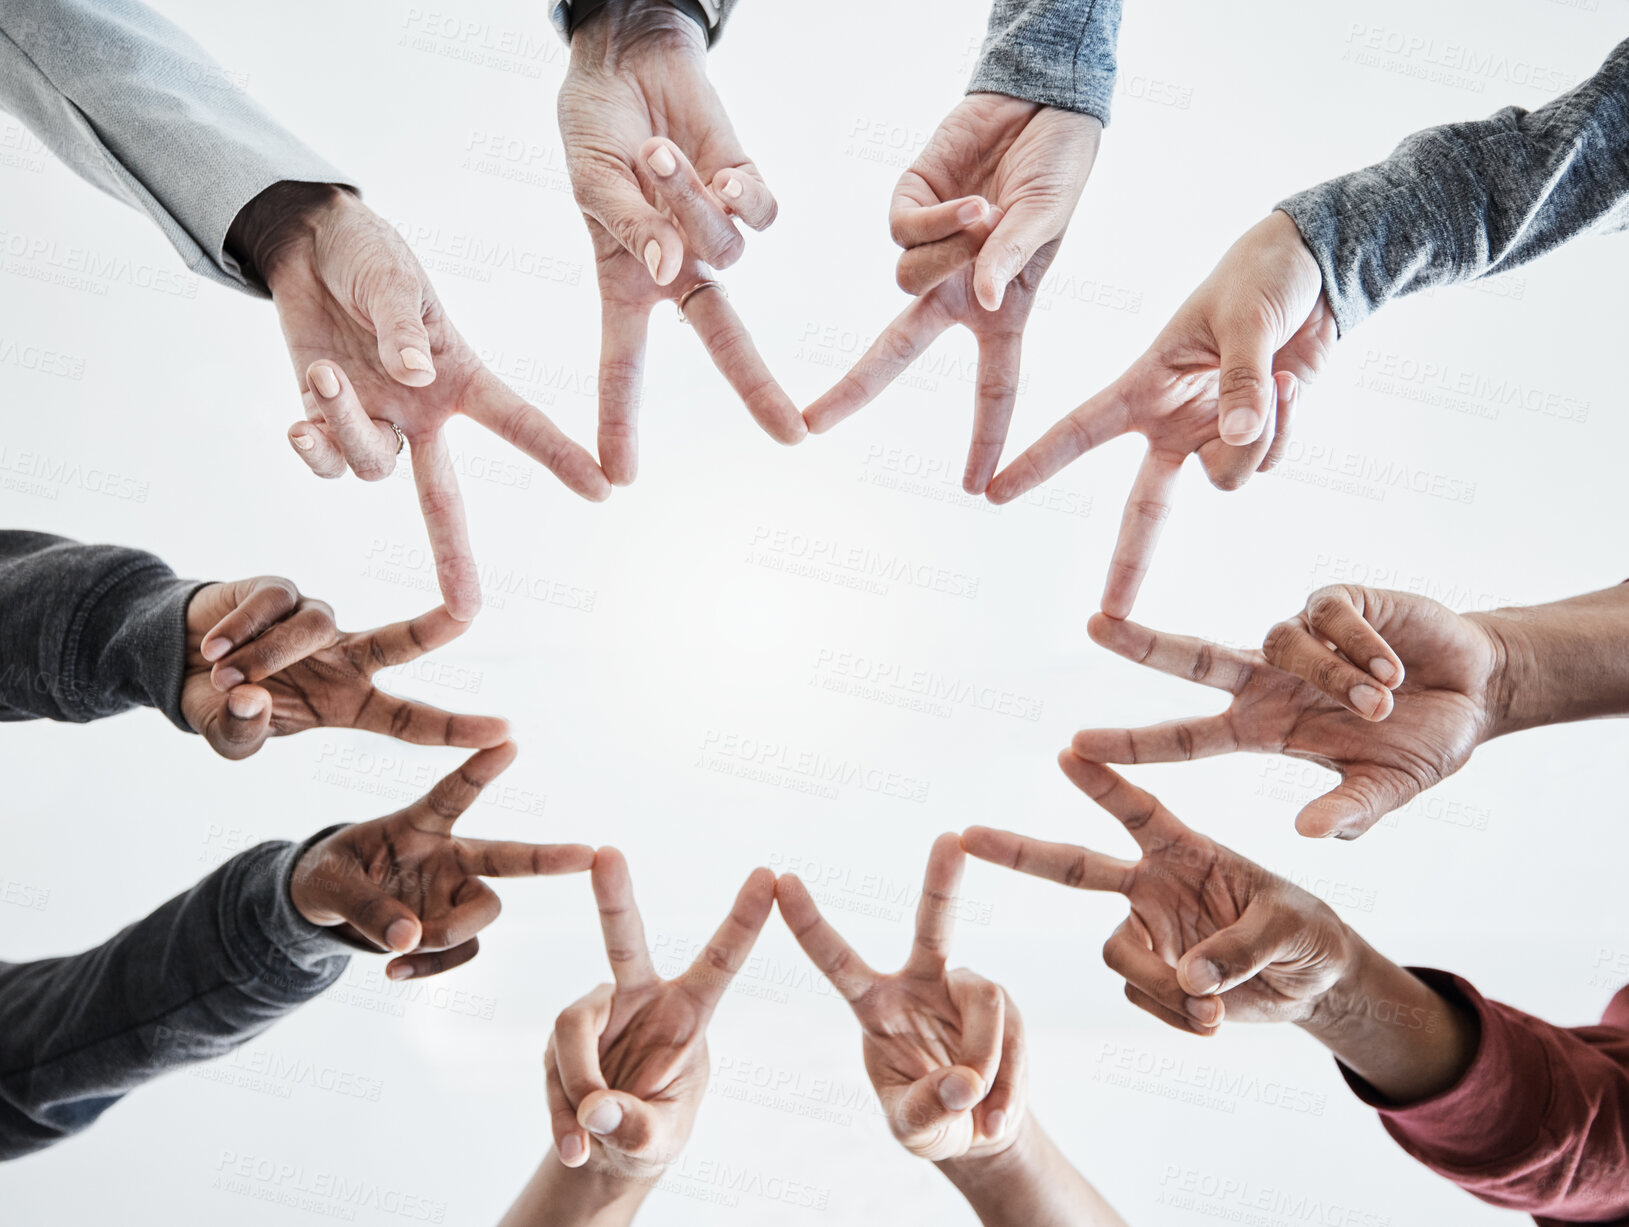 Buy stock photo Below hands in circle making a star shape. A group of people putting their fingers together while standing in a huddle outside against a clear and bright sky. Anything is possible with teamwork